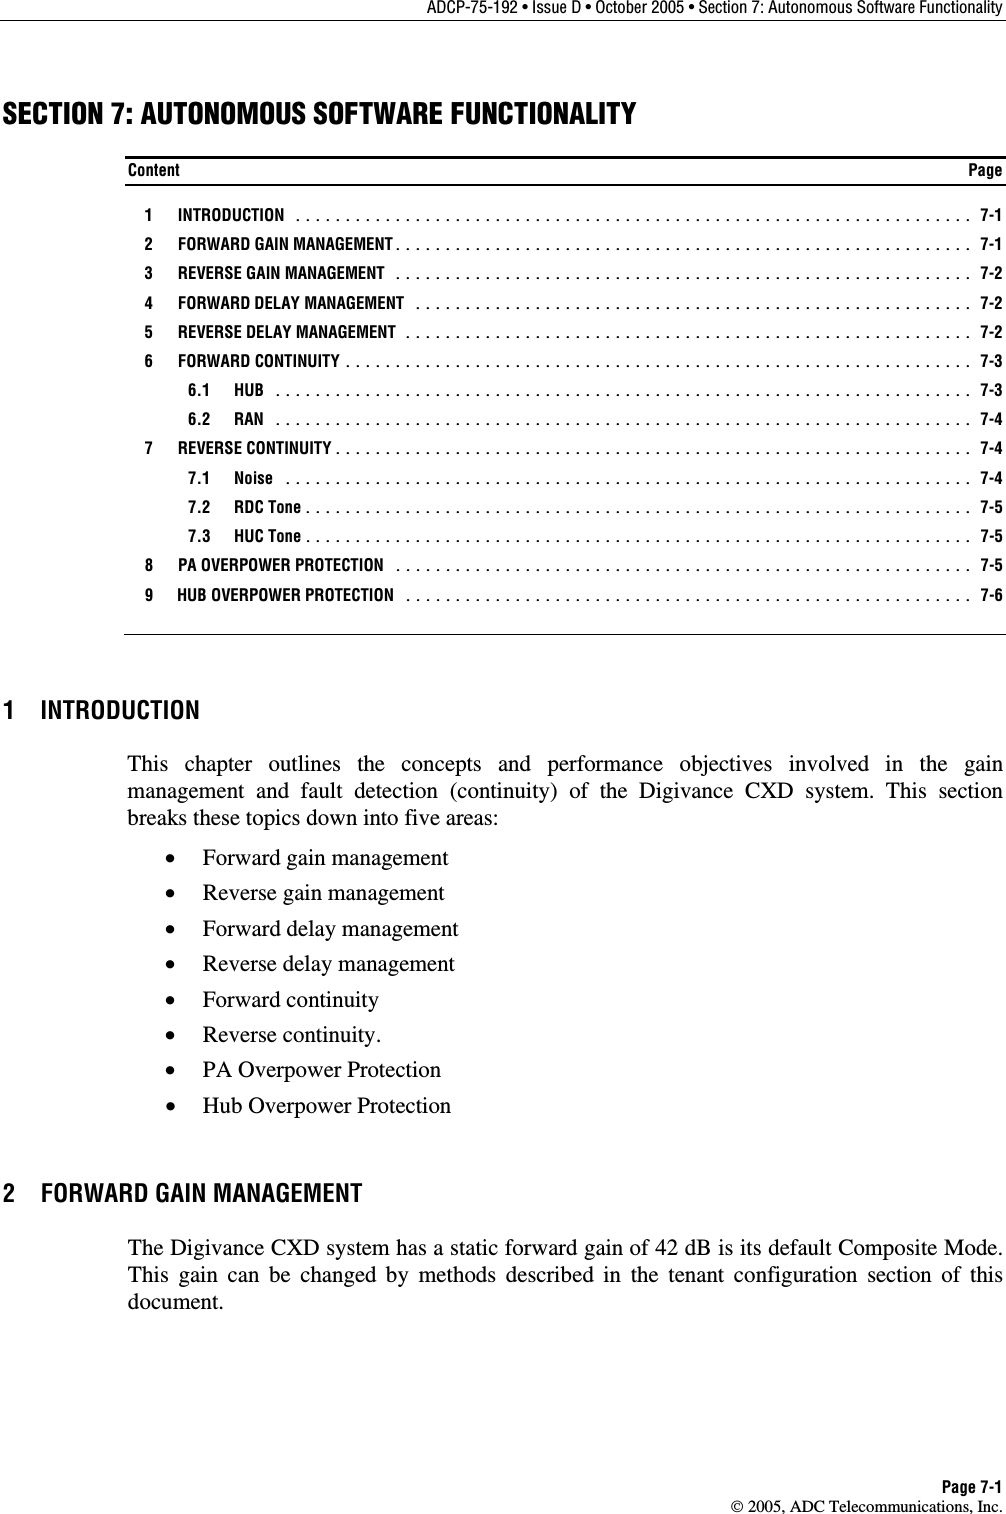 ADCP-75-192 • Issue D • October 2005 • Section 7: Autonomous Software Functionality Page 7-1  2005, ADC Telecommunications, Inc. SECTION 7: AUTONOMOUS SOFTWARE FUNCTIONALITY Content  Page  1  INTRODUCTION .................................................................... 7-1  2  FORWARD GAIN MANAGEMENT.......................................................... 7-1   3  REVERSE GAIN MANAGEMENT .......................................................... 7-2  4  FORWARD DELAY MANAGEMENT ........................................................ 7-2  5  REVERSE DELAY MANAGEMENT ......................................................... 7-2  6  FORWARD CONTINUITY ............................................................... 7-3  6.1 HUB ...................................................................... 7-3  6.2 RAN ...................................................................... 7-4  7  REVERSE CONTINUITY................................................................ 7-4  7.1 Noise ..................................................................... 7-4  7.2 RDC Tone................................................................... 7-5  7.3 HUC Tone................................................................... 7-5   8  PA OVERPOWER PROTECTION .......................................................... 7-5   9  HUB OVERPOWER PROTECTION ......................................................... 7-6 1 INTRODUCTION This chapter outlines the concepts and performance objectives involved in the gain management and fault detection (continuity) of the Digivance CXD system. This section breaks these topics down into five areas: •  Forward gain management •  Reverse gain management •  Forward delay management •  Reverse delay management •  Forward continuity •  Reverse continuity. •  PA Overpower Protection •  Hub Overpower Protection 2  FORWARD GAIN MANAGEMENT The Digivance CXD system has a static forward gain of 42 dB is its default Composite Mode.  This gain can be changed by methods described in the tenant configuration section of this document. 